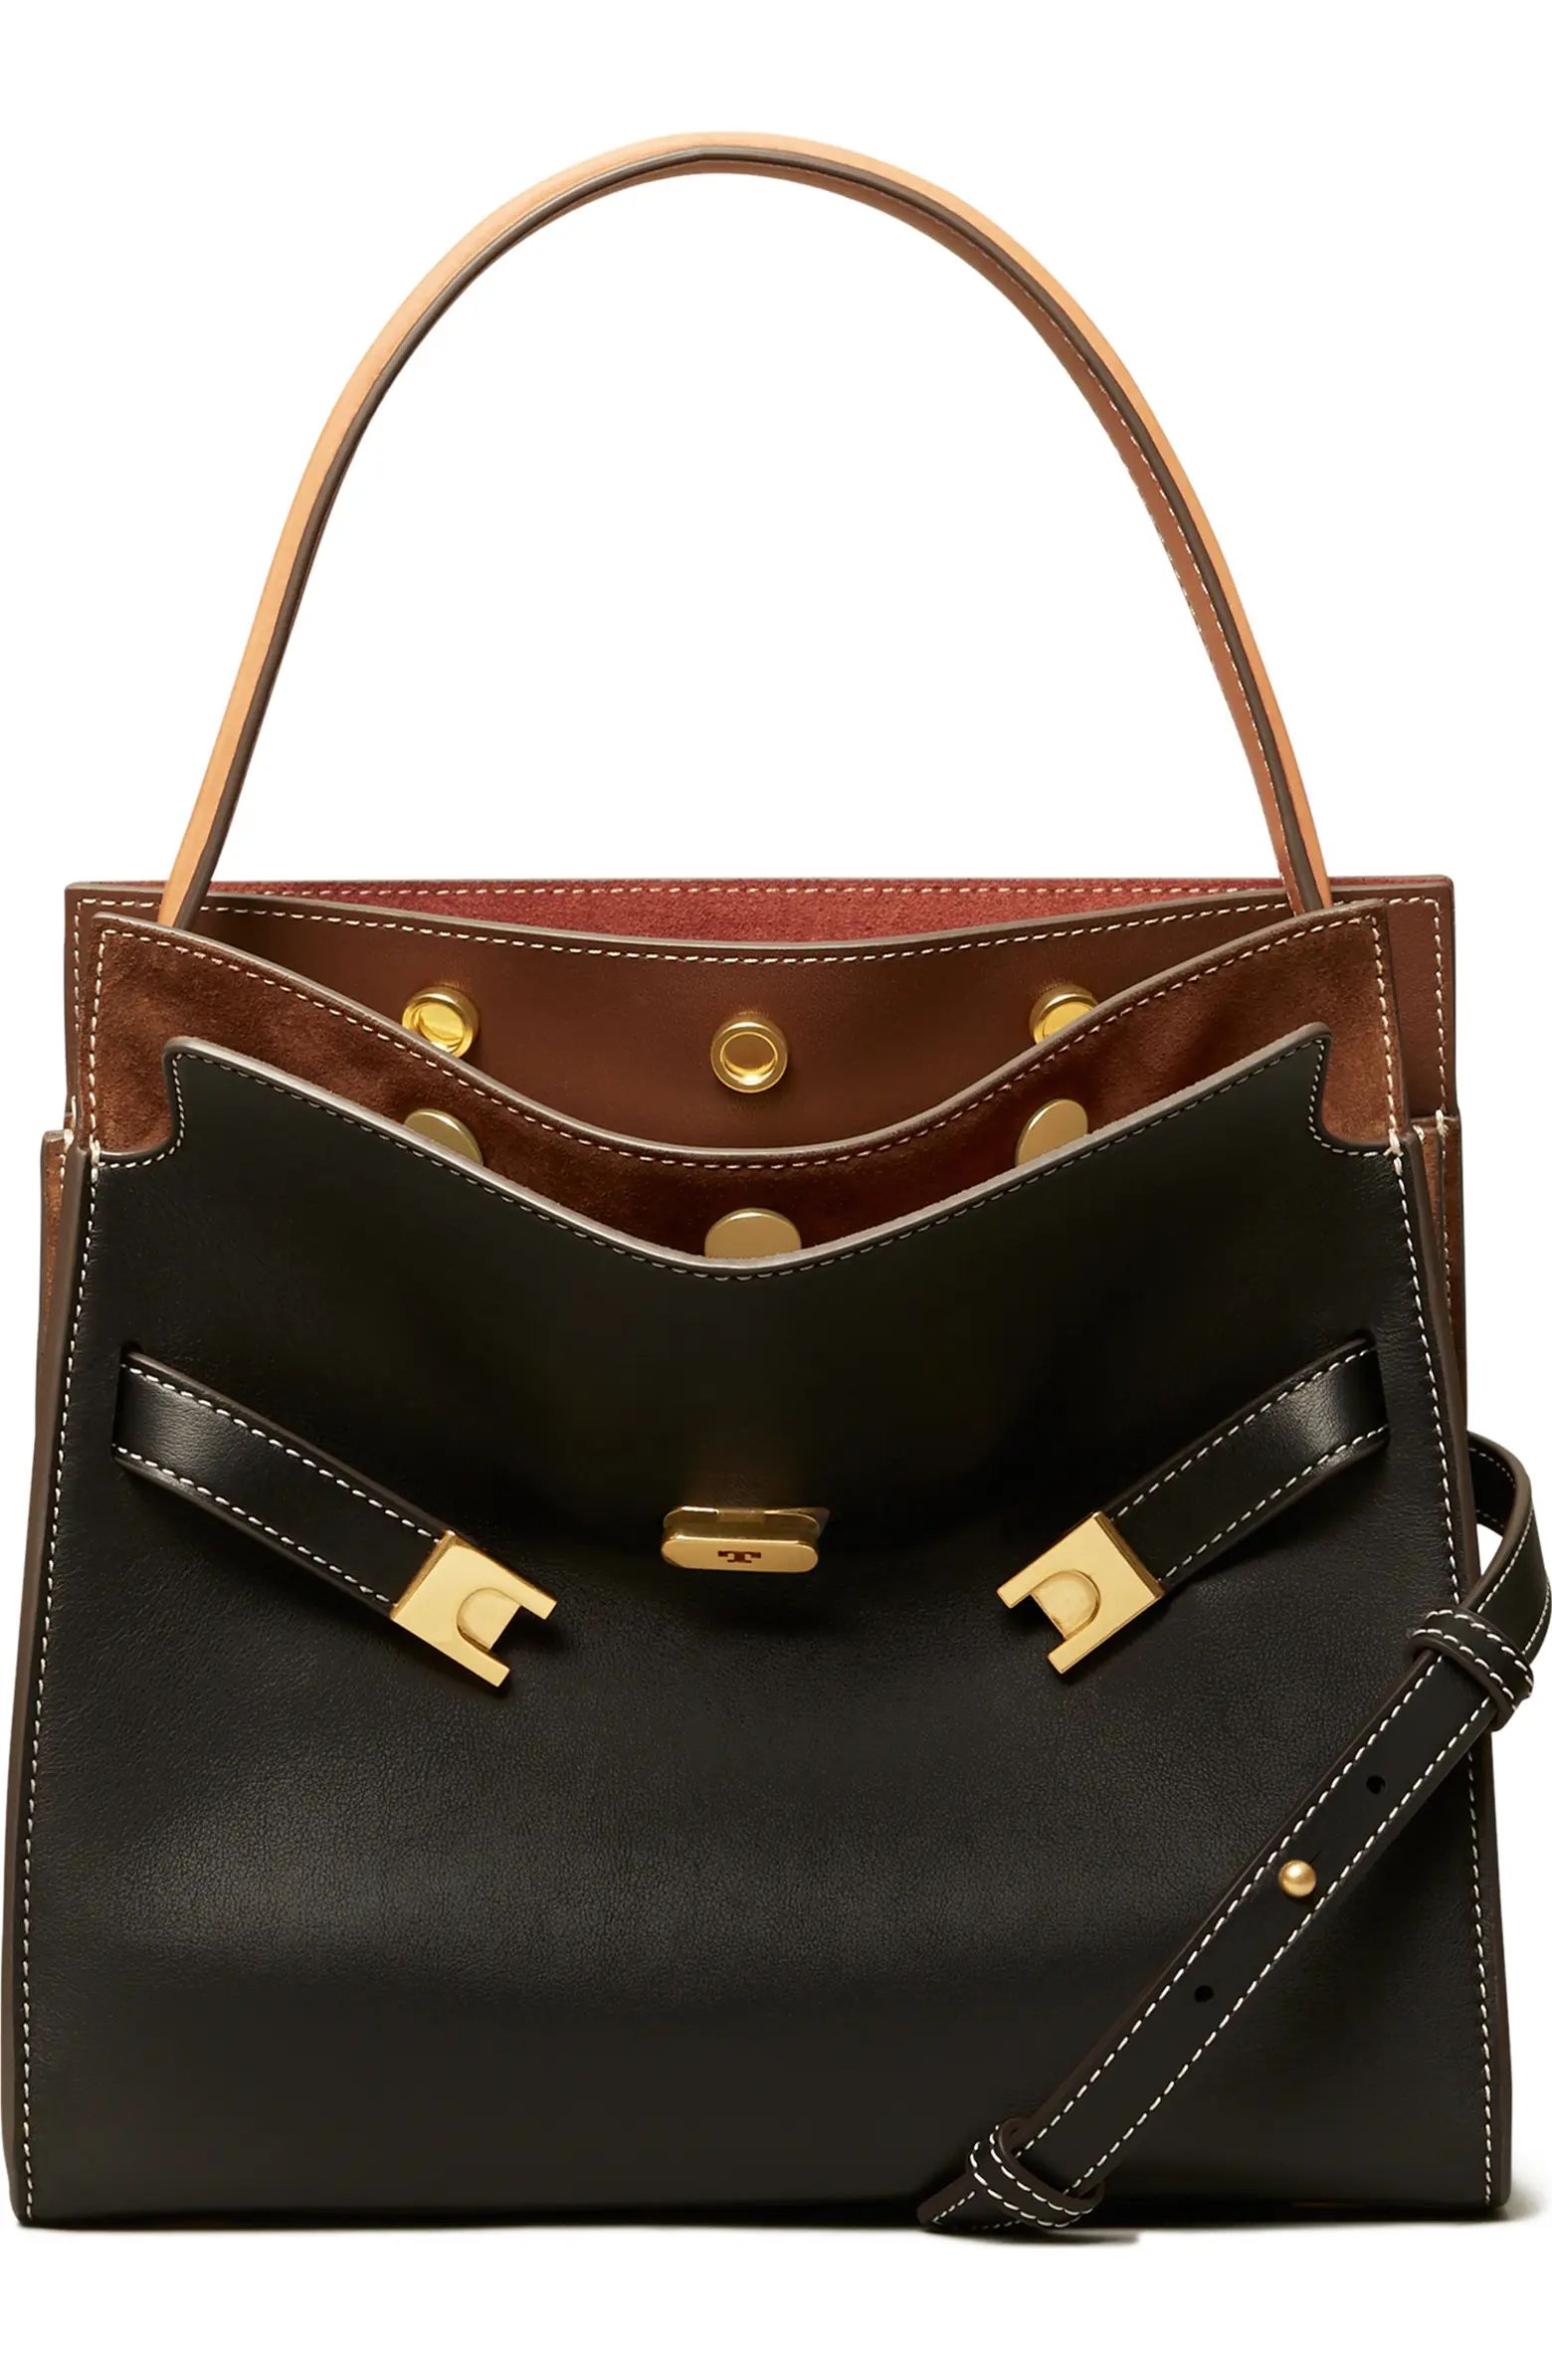 Lee Radziwill Small Leather Double Bag | Nordstrom